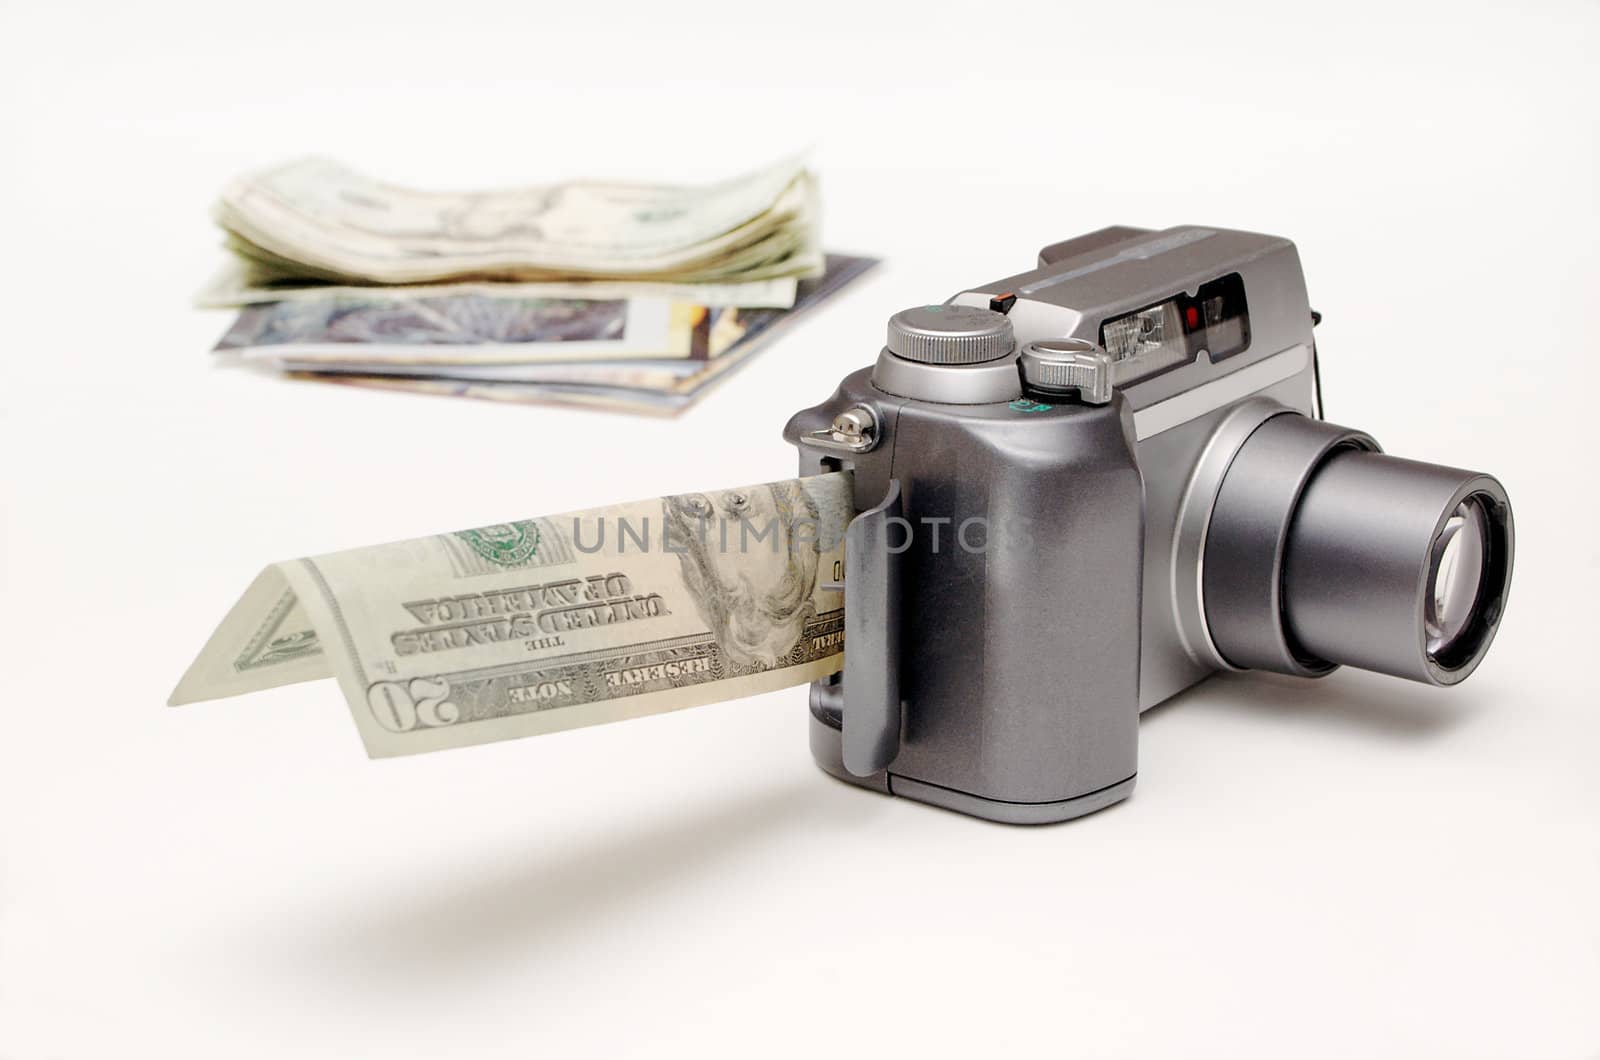 A digital camera, with the memory card slot open and a  bill sticking out of it, sits in front of a small pile of photos and money (which are defocused to show depth). Objects are on a white background.